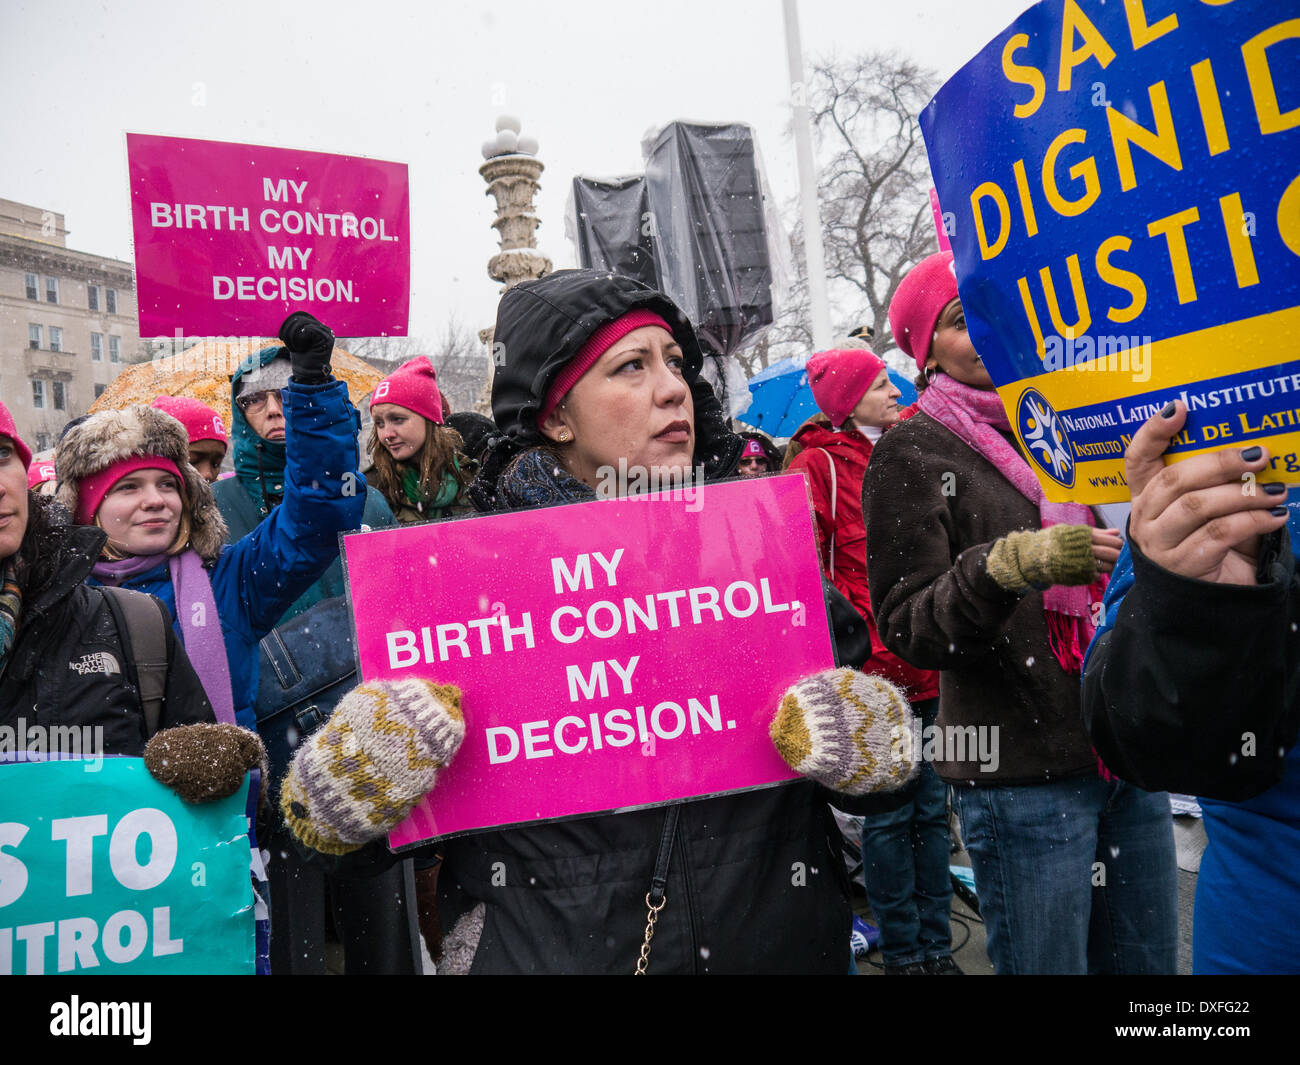 Washington, DC USA 25 March, 3014: Hundreds of women protested at the U.S. Supreme Court to voice opposition to the Hobby Lobby case, which seeks to give health exemptions for religious beliefs. The court heard arguments today in this contentious battle. Credit:  Ann Little/Alamy Live News Stock Photo